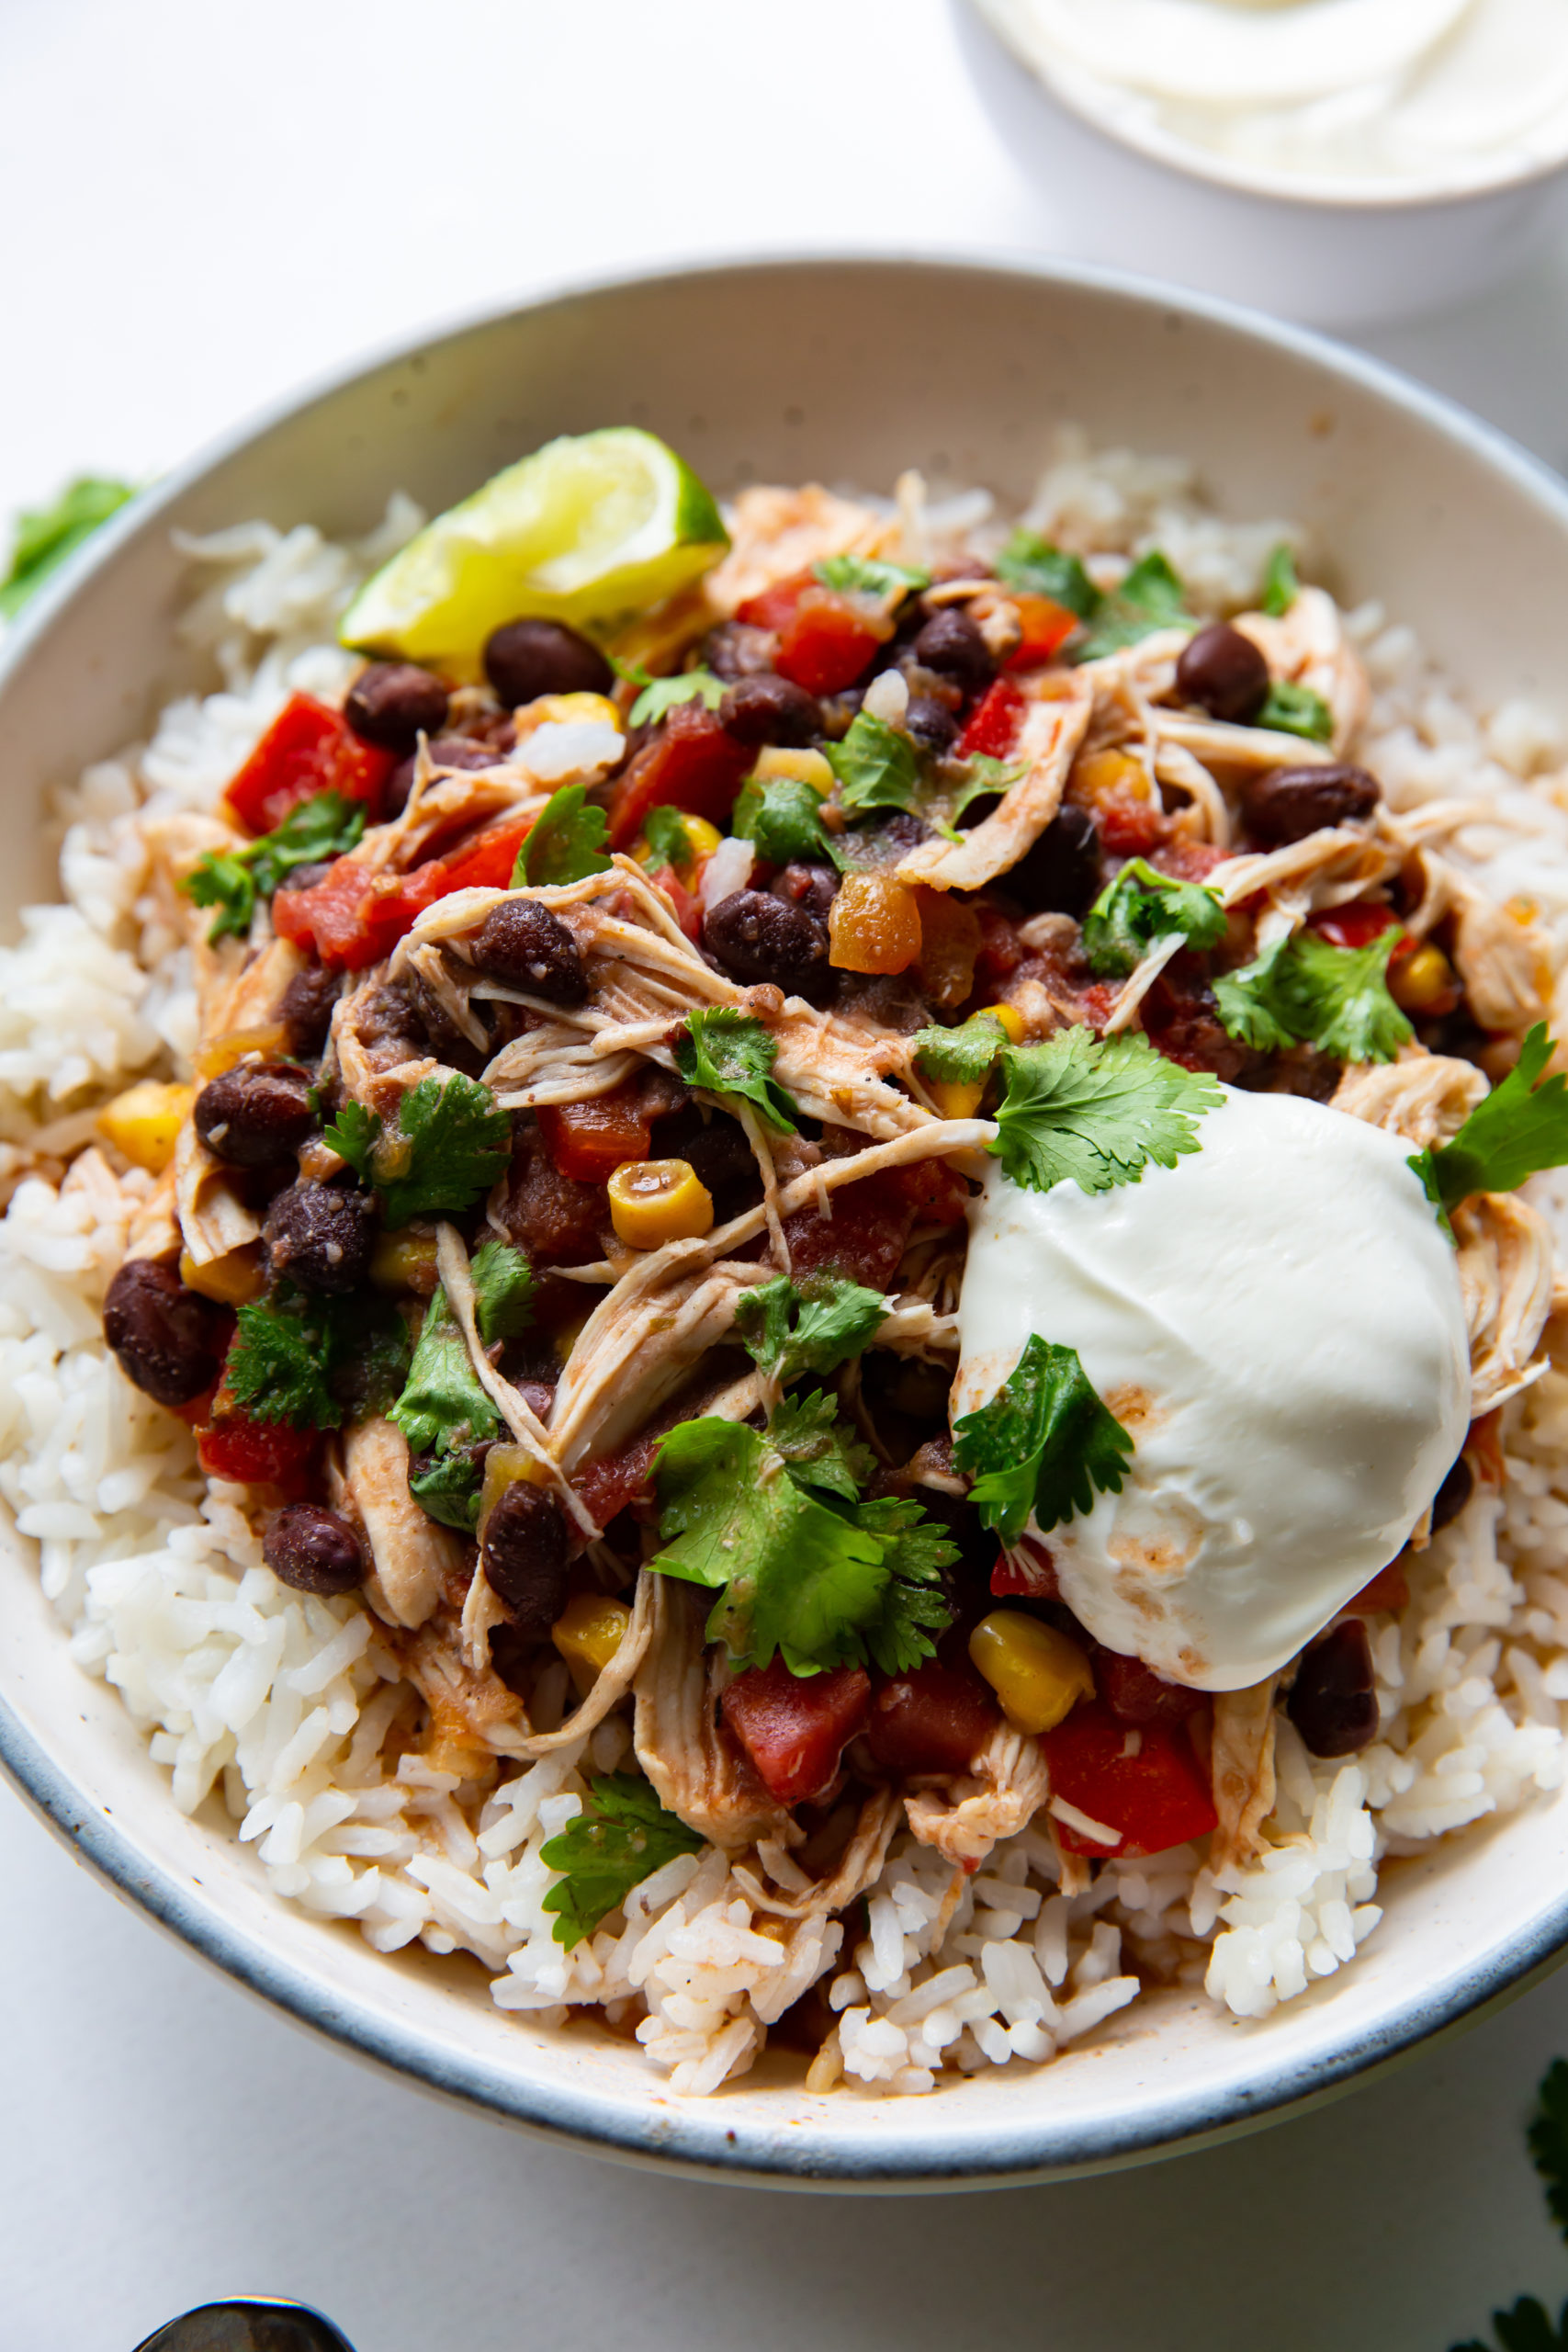 An aerial view of a bowl of Southwestern chicken and rice, garnished with sour cream and fresh cilantro.